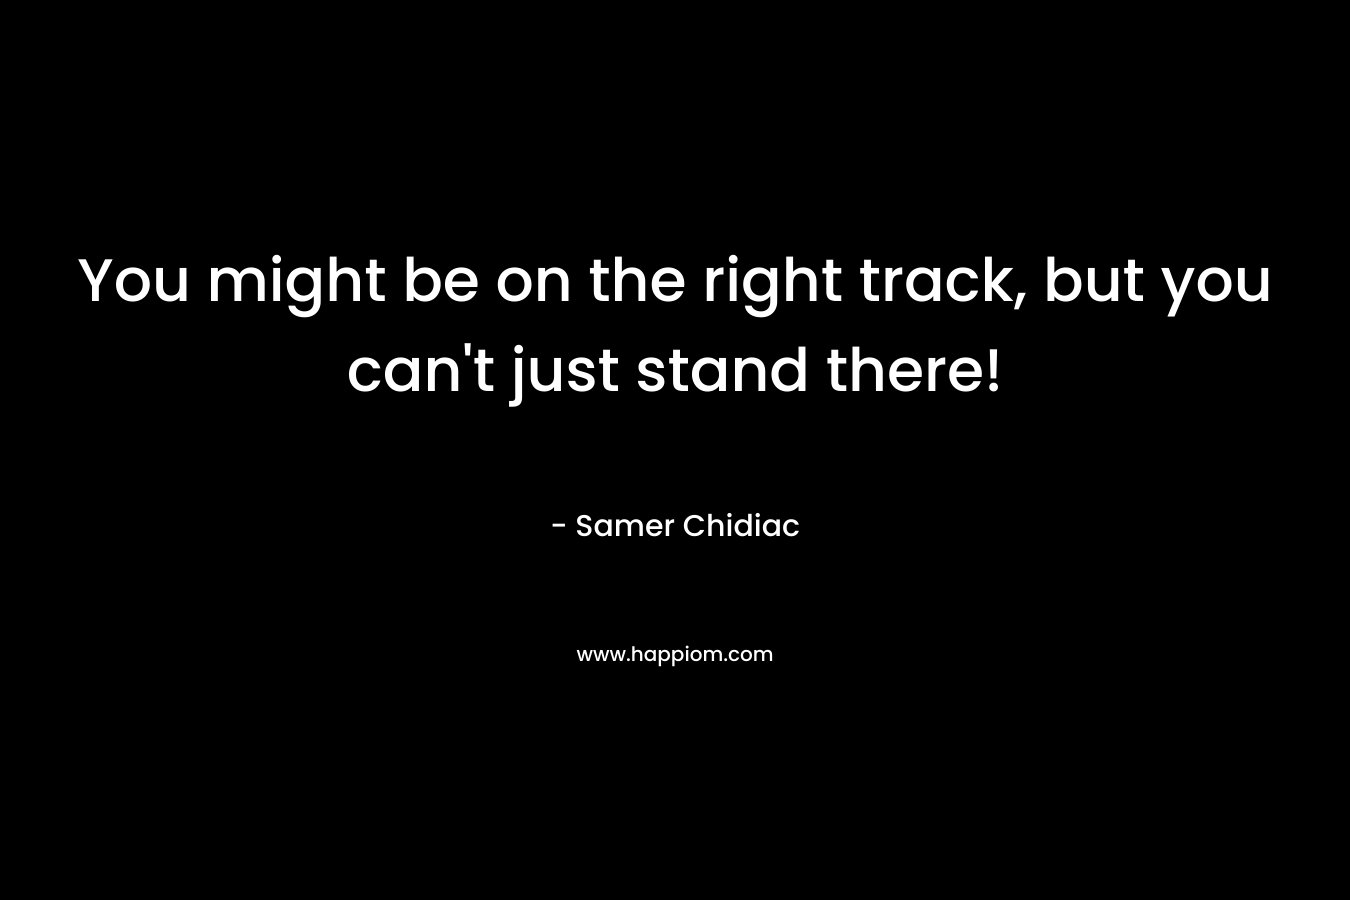 You might be on the right track, but you can’t just stand there! – Samer Chidiac